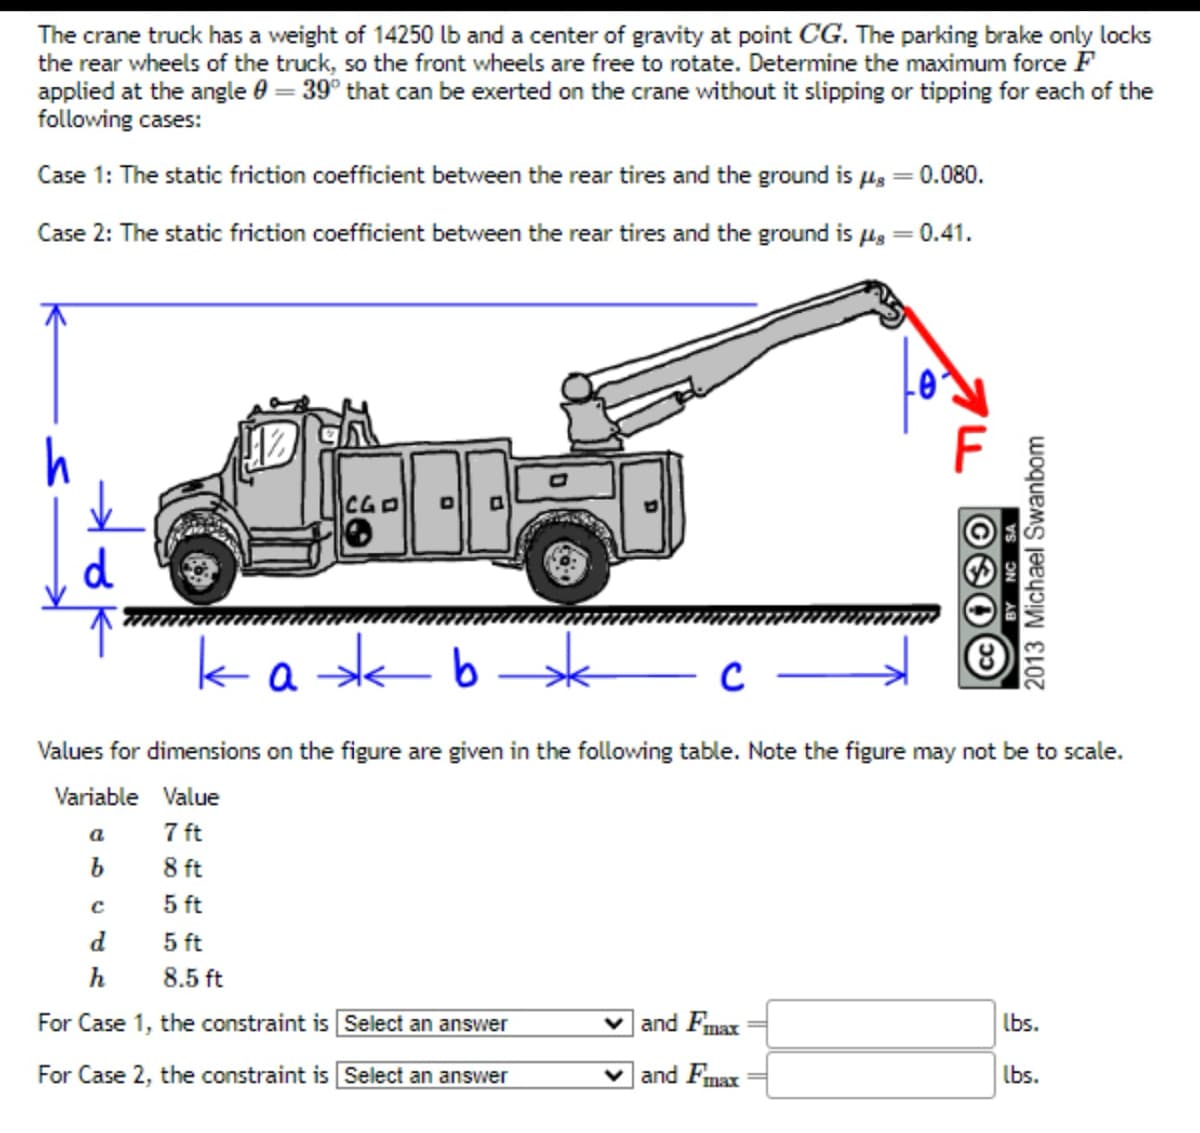 The crane truck has a weight of 14250 lb and a center of gravity at point CG. The parking brake only locks
the rear wheels of the truck, so the front wheels are free to rotate. Determine the maximum force F
applied at the angle 0 = 39° that can be exerted on the crane without it slipping or tipping for each of the
following cases:
Case 1: The static friction coefficient between the rear tires and the ground is μ
Case 2: The static friction coefficient between the rear tires and the ground is μ
✓
d
CGO D
a
b
с
d
5 ft
h
8.5 ft
For Case 1, the constraint is Select an answer
For Case 2, the constraint is Select an answer
= 0.080.
• and Fmax
and Fmax
= 0.41.
ka b
c
Values for dimensions on the figure are given in the following table. Note the figure may not be to scale.
Variable Value
7 ft
8 ft
5 ft
cc 130
2013 Michael Swanbom
8
lbs.
lbs.